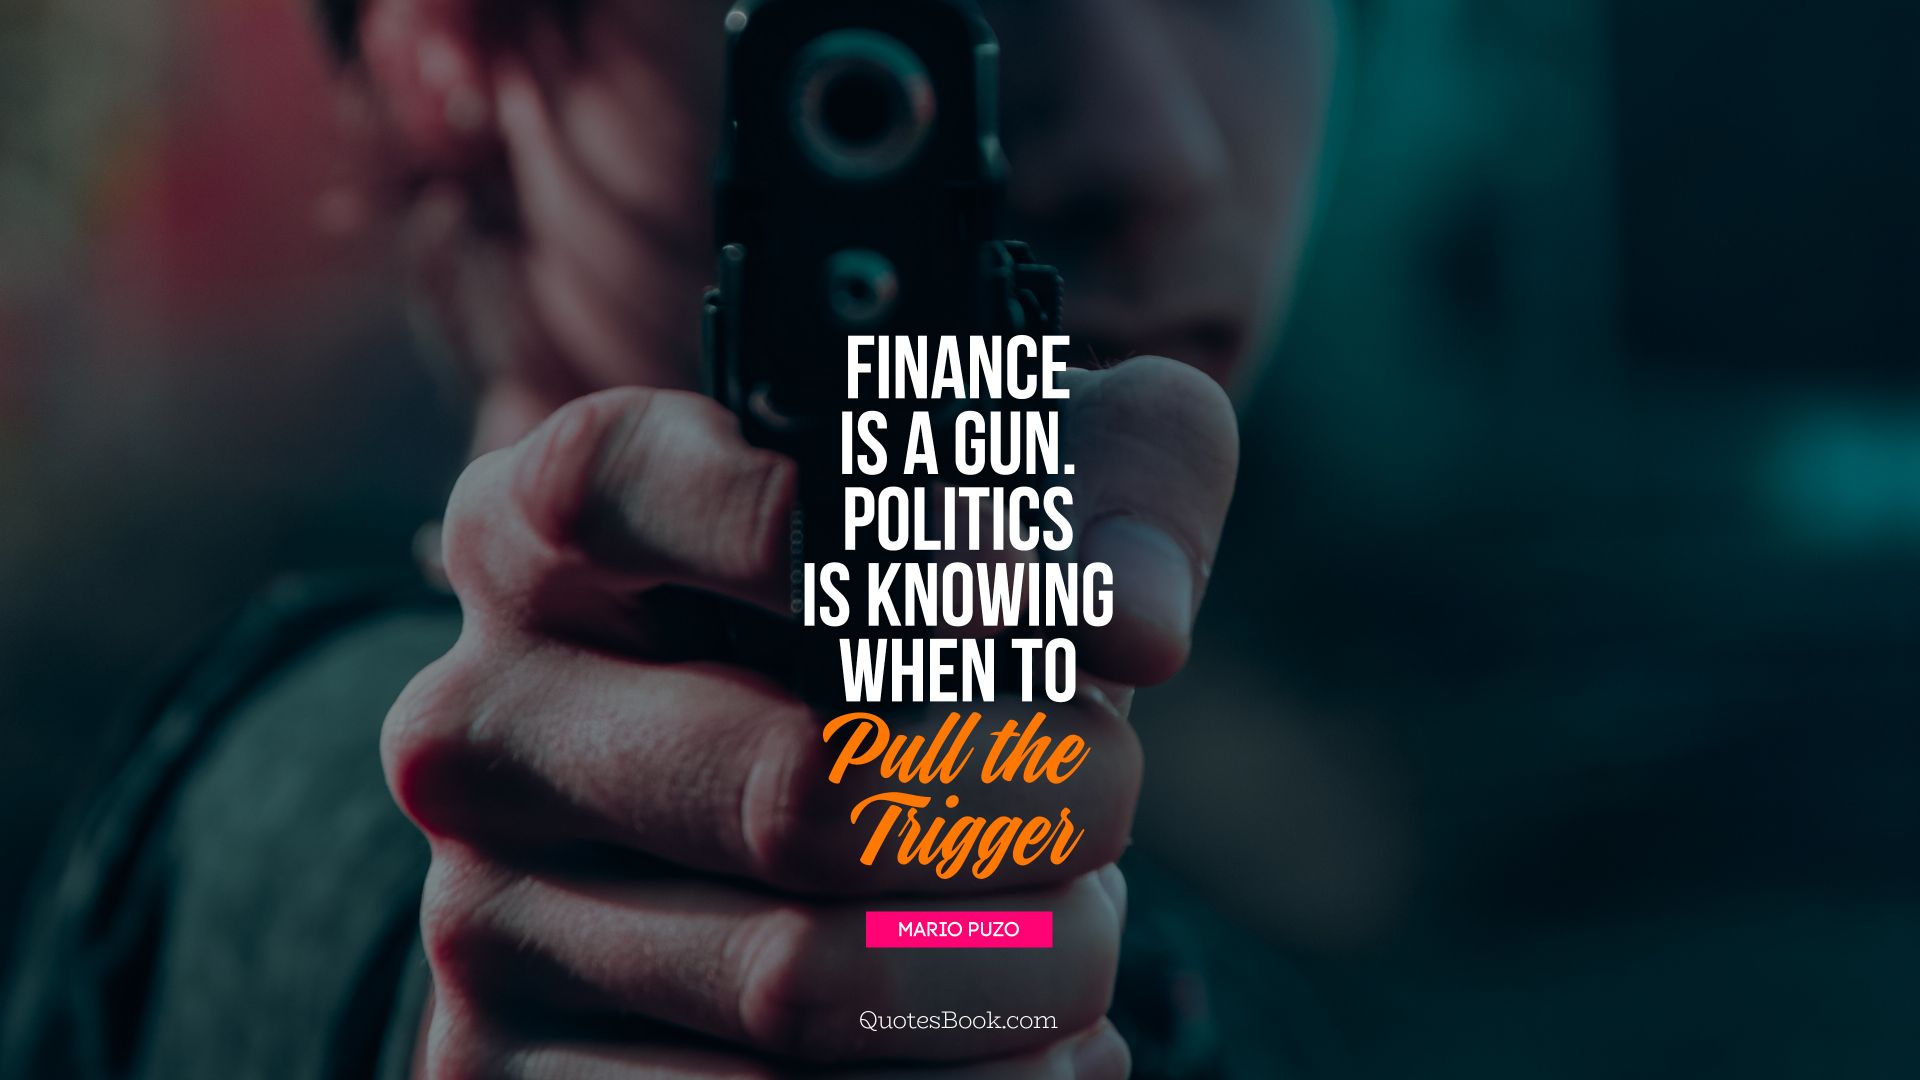 Finance is a gun. Politics is knowing 
when to pull the trigger. - Quote by Mario Puzo